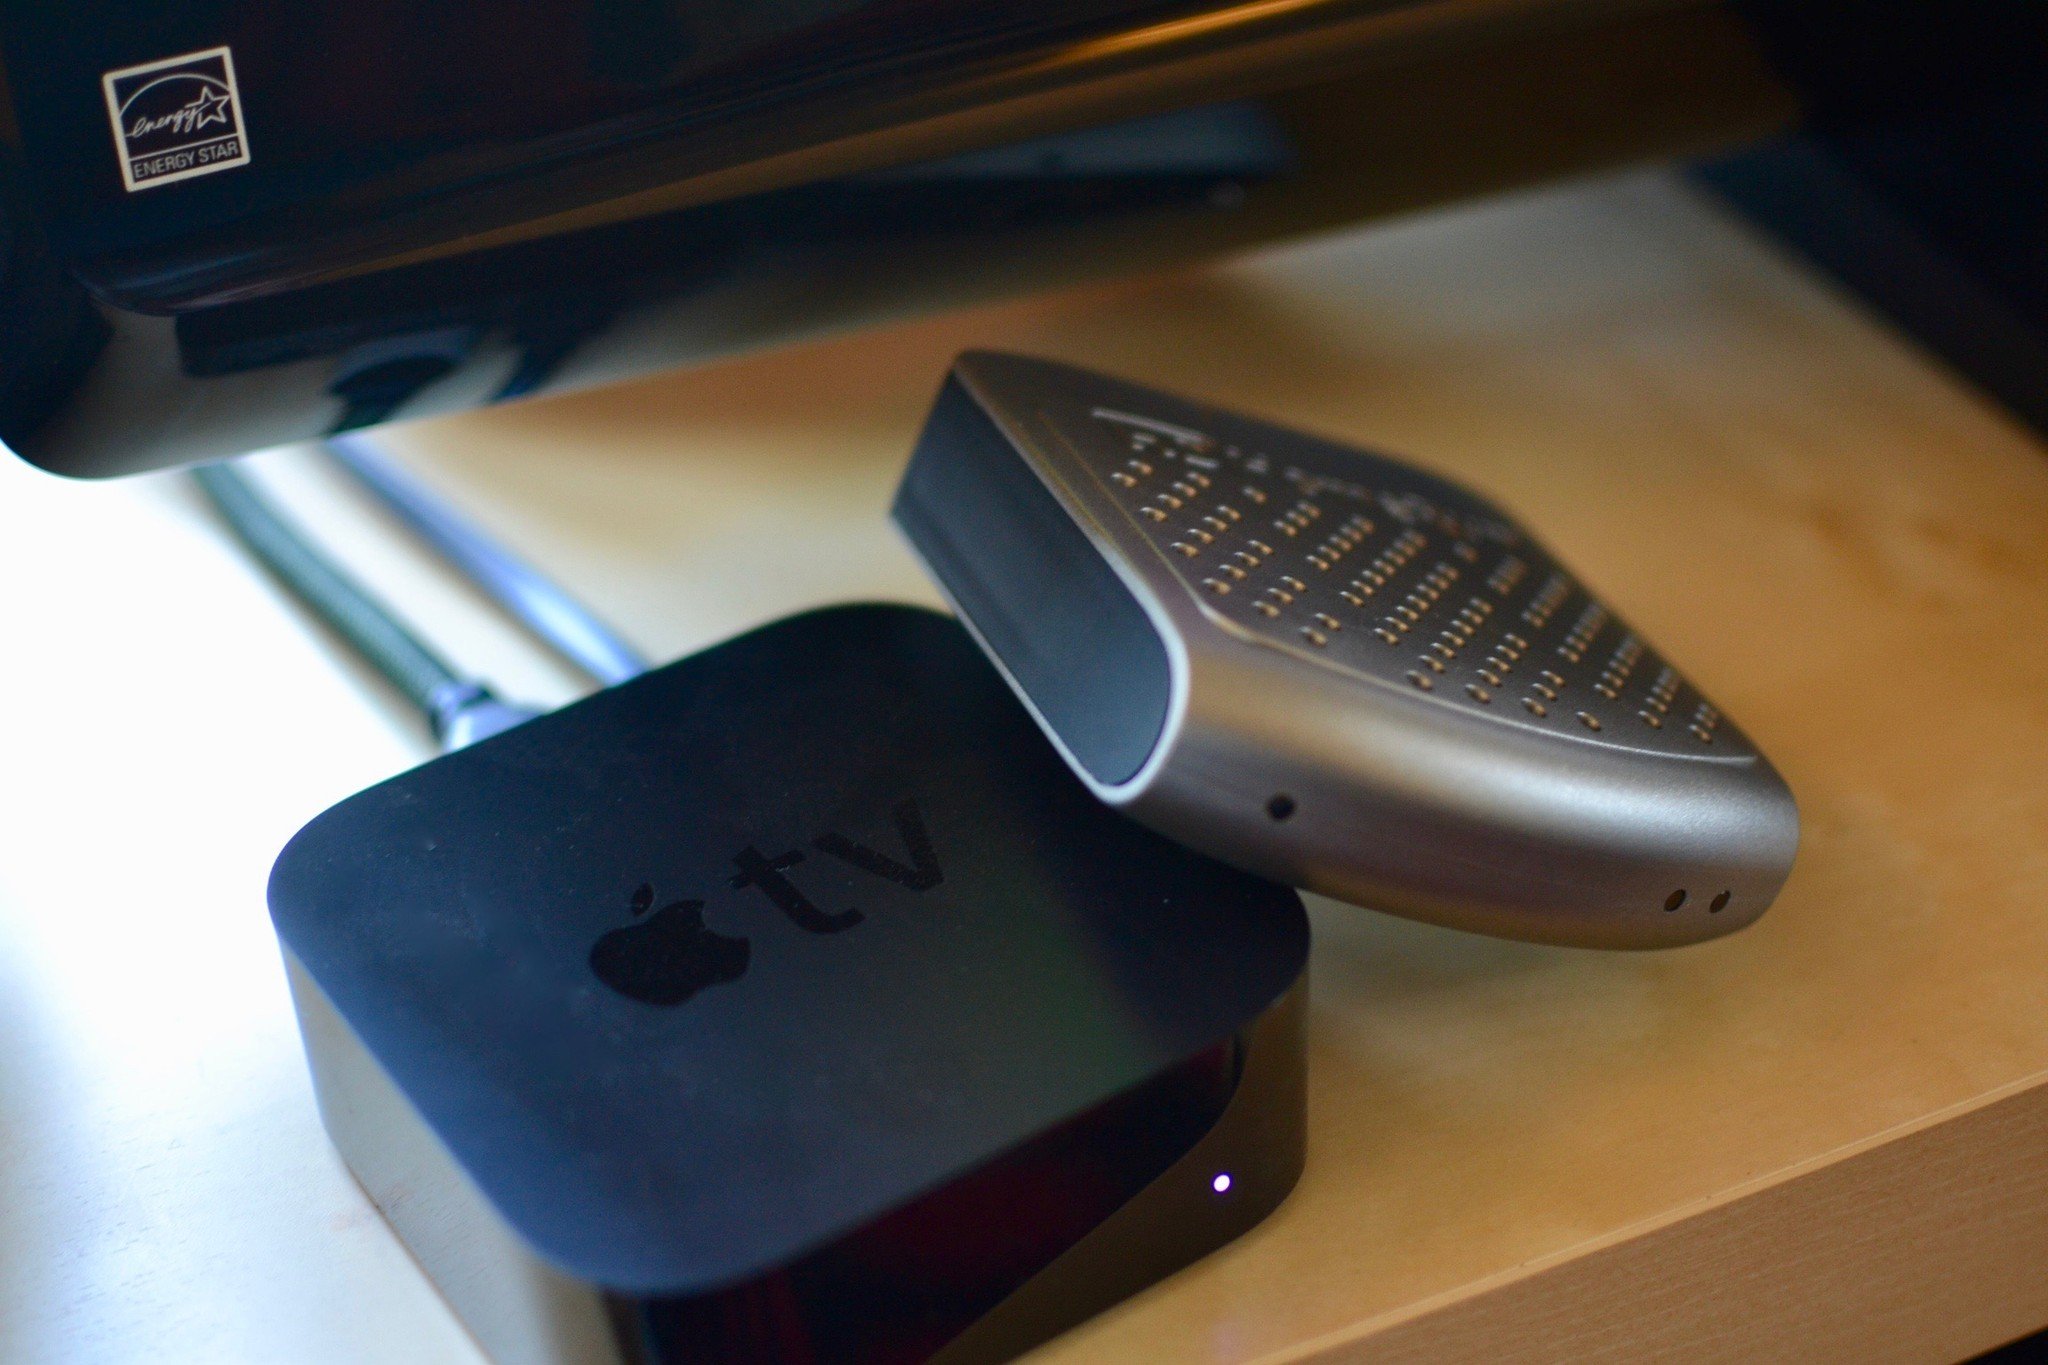 lige ud Strengt sejr How to watch live broadcast TV on your Apple TV without cable | iMore